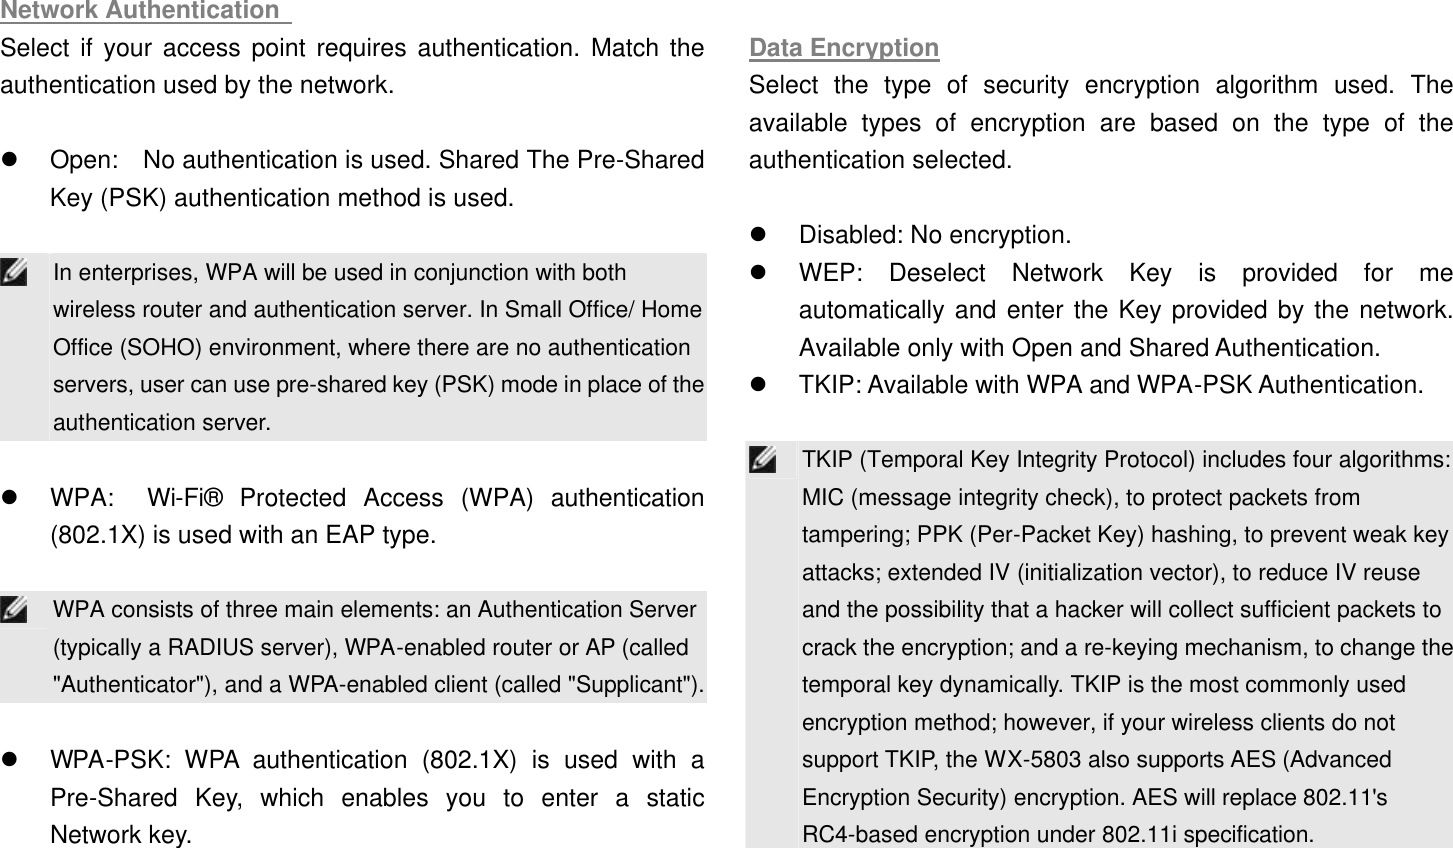 Network Authentication   Select if your access point requires authentication. Match the authentication used by the network.    l Open:  No authentication is used. Shared The Pre-Shared Key (PSK) authentication method is used.     In enterprises, WPA will be used in conjunction with both wireless router and authentication server. In Small Office/ Home Office (SOHO) environment, where there are no authentication servers, user can use pre-shared key (PSK) mode in place of the authentication server.  l WPA:  Wi-Fi® Protected Access (WPA) authentication (802.1X) is used with an EAP type.     WPA consists of three main elements: an Authentication Server (typically a RADIUS server), WPA-enabled router or AP (called &quot;Authenticator&quot;), and a WPA-enabled client (called &quot;Supplicant&quot;).  l WPA-PSK: WPA authentication (802.1X) is used with a Pre-Shared Key, which enables you to enter a static Network key.    Data Encryption Select the type of security encryption algorithm used. The available types of encryption are based on the type of the authentication selected.    l Disabled: No encryption.   l WEP: Deselect Network Key is provided for me automatically and enter the Key provided by the network. Available only with Open and Shared Authentication.   l TKIP: Available with WPA and WPA-PSK Authentication.     TKIP (Temporal Key Integrity Protocol) includes four algorithms: MIC (message integrity check), to protect packets from tampering; PPK (Per-Packet Key) hashing, to prevent weak key attacks; extended IV (initialization vector), to reduce IV reuse and the possibility that a hacker will collect sufficient packets to crack the encryption; and a re-keying mechanism, to change the temporal key dynamically. TKIP is the most commonly used encryption method; however, if your wireless clients do not support TKIP, the WX-5803 also supports AES (Advanced Encryption Security) encryption. AES will replace 802.11&apos;s RC4-based encryption under 802.11i specification. 